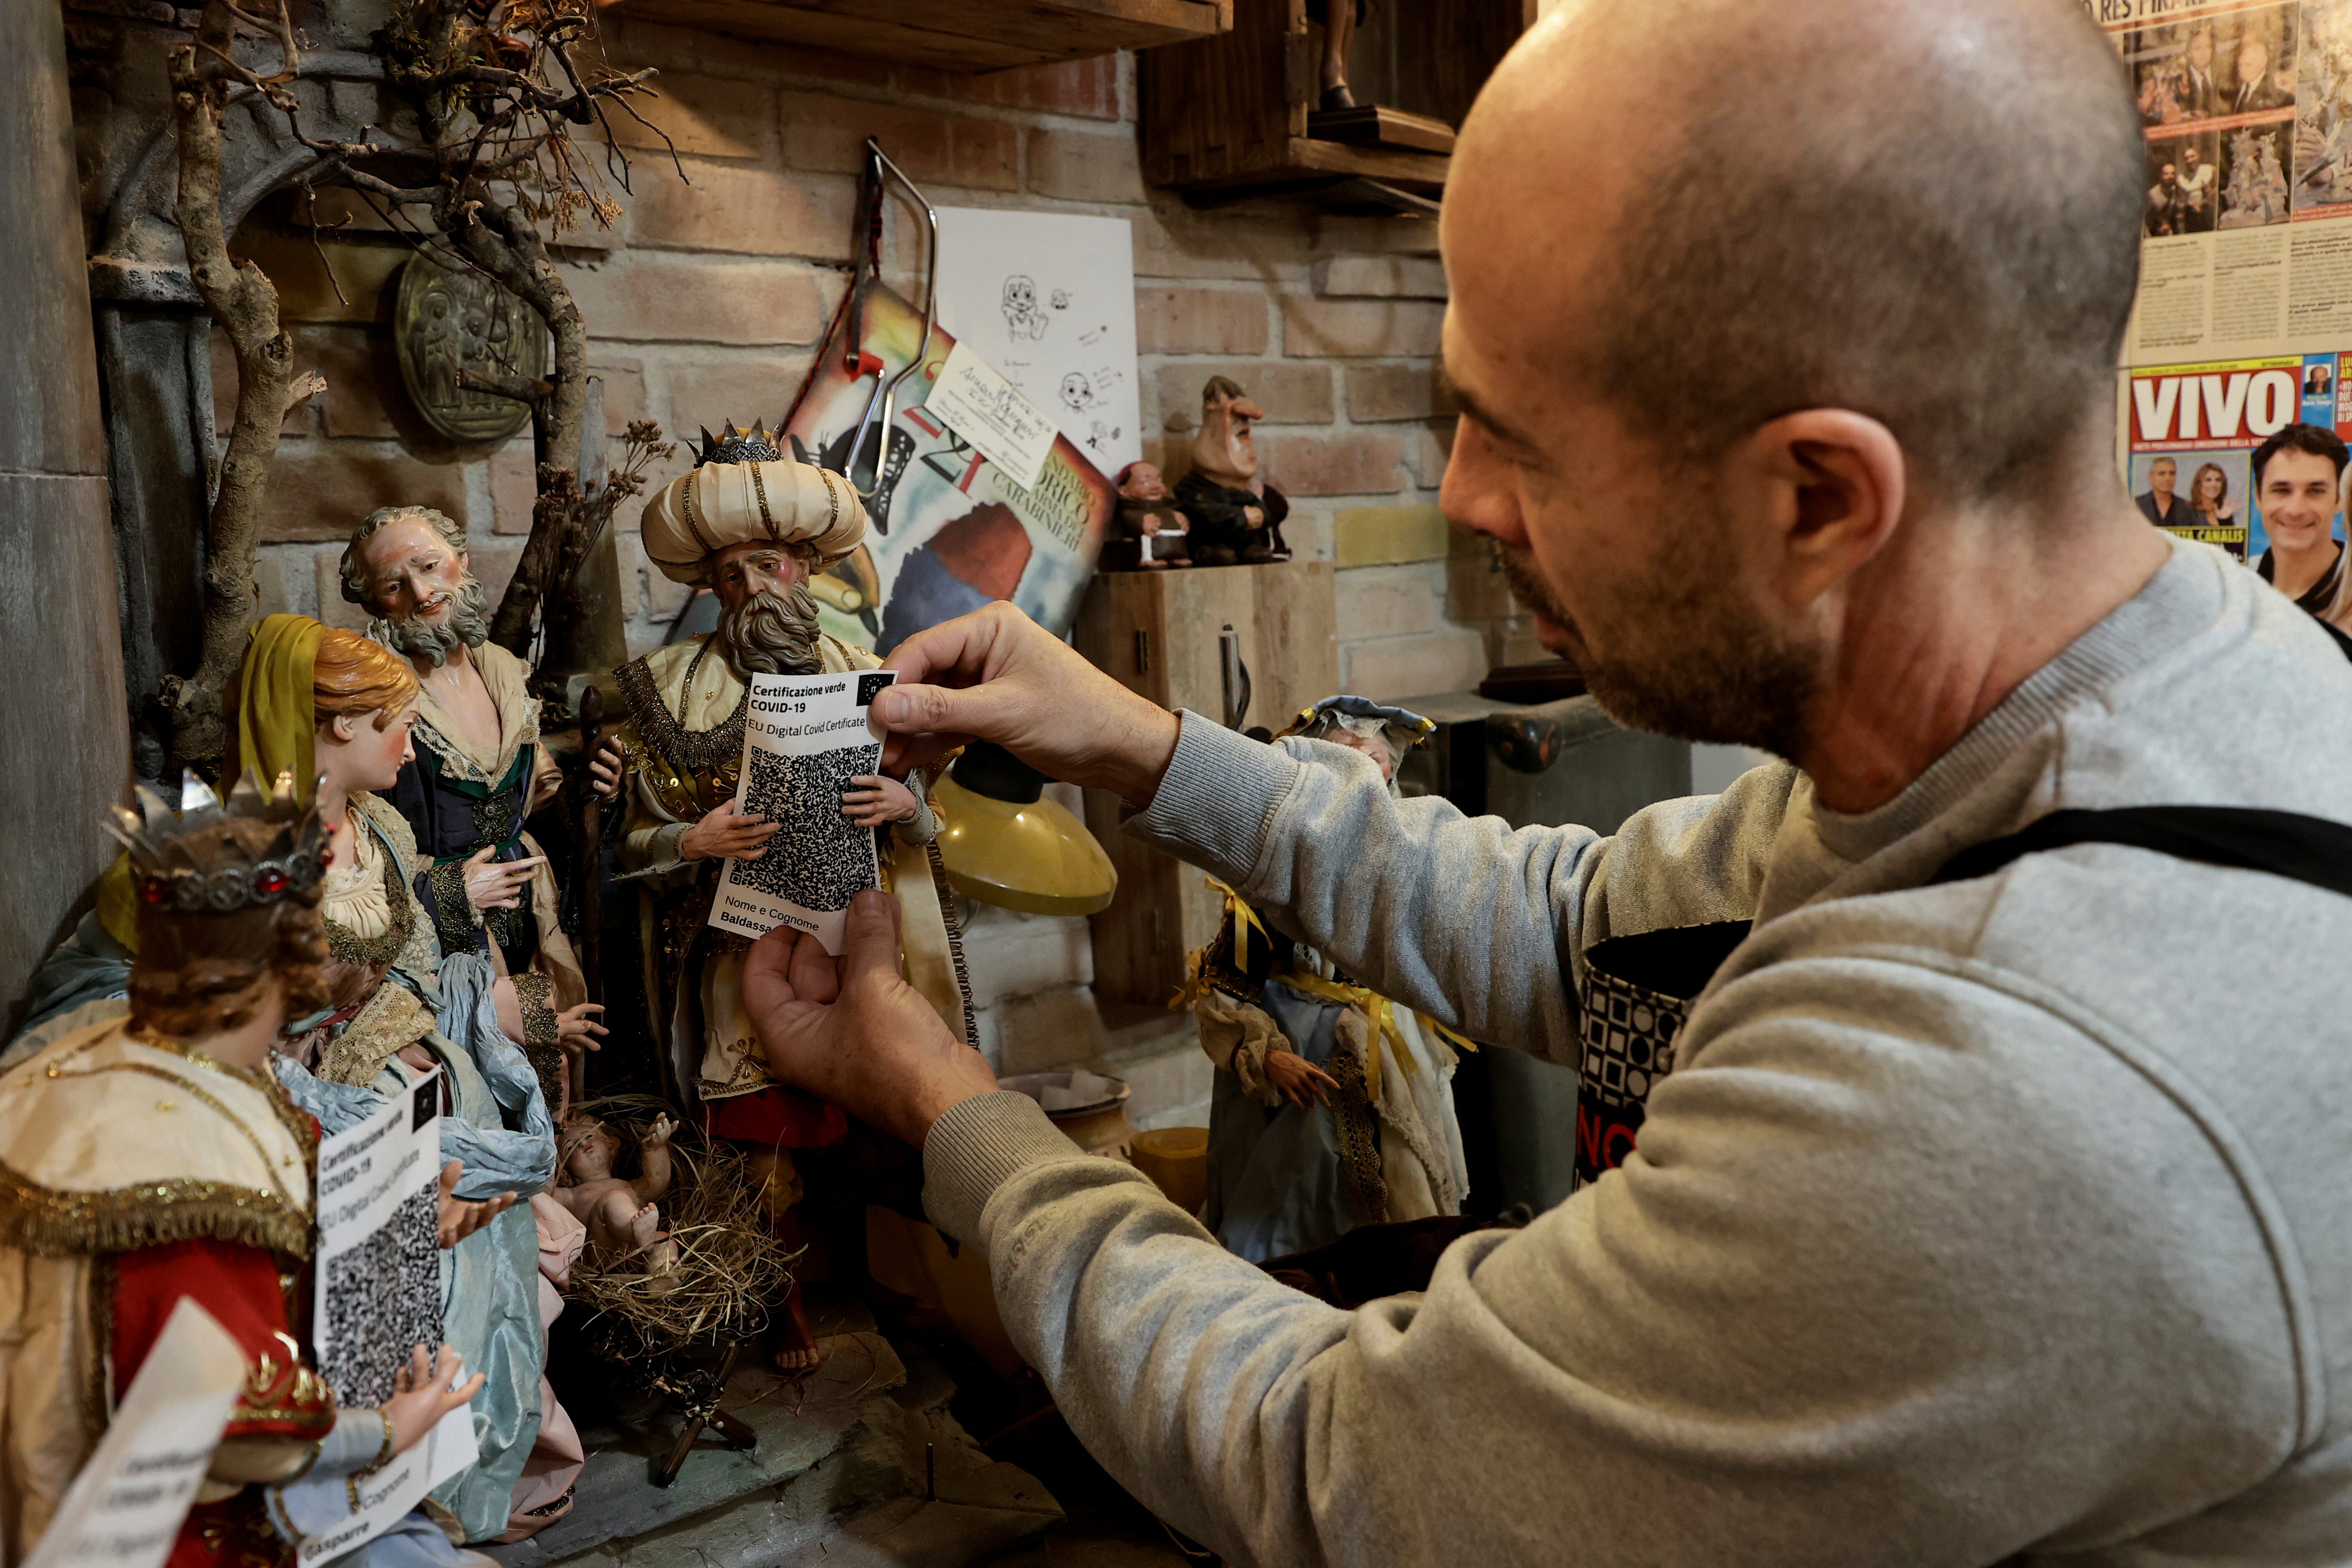 Craftsman Marco Ferrigno works on Christmas nativity figurines, including the three wise men showing their COVID-19 health passes, in Naples, Italy November 3, 2021. REUTERS/Ciro De Luca